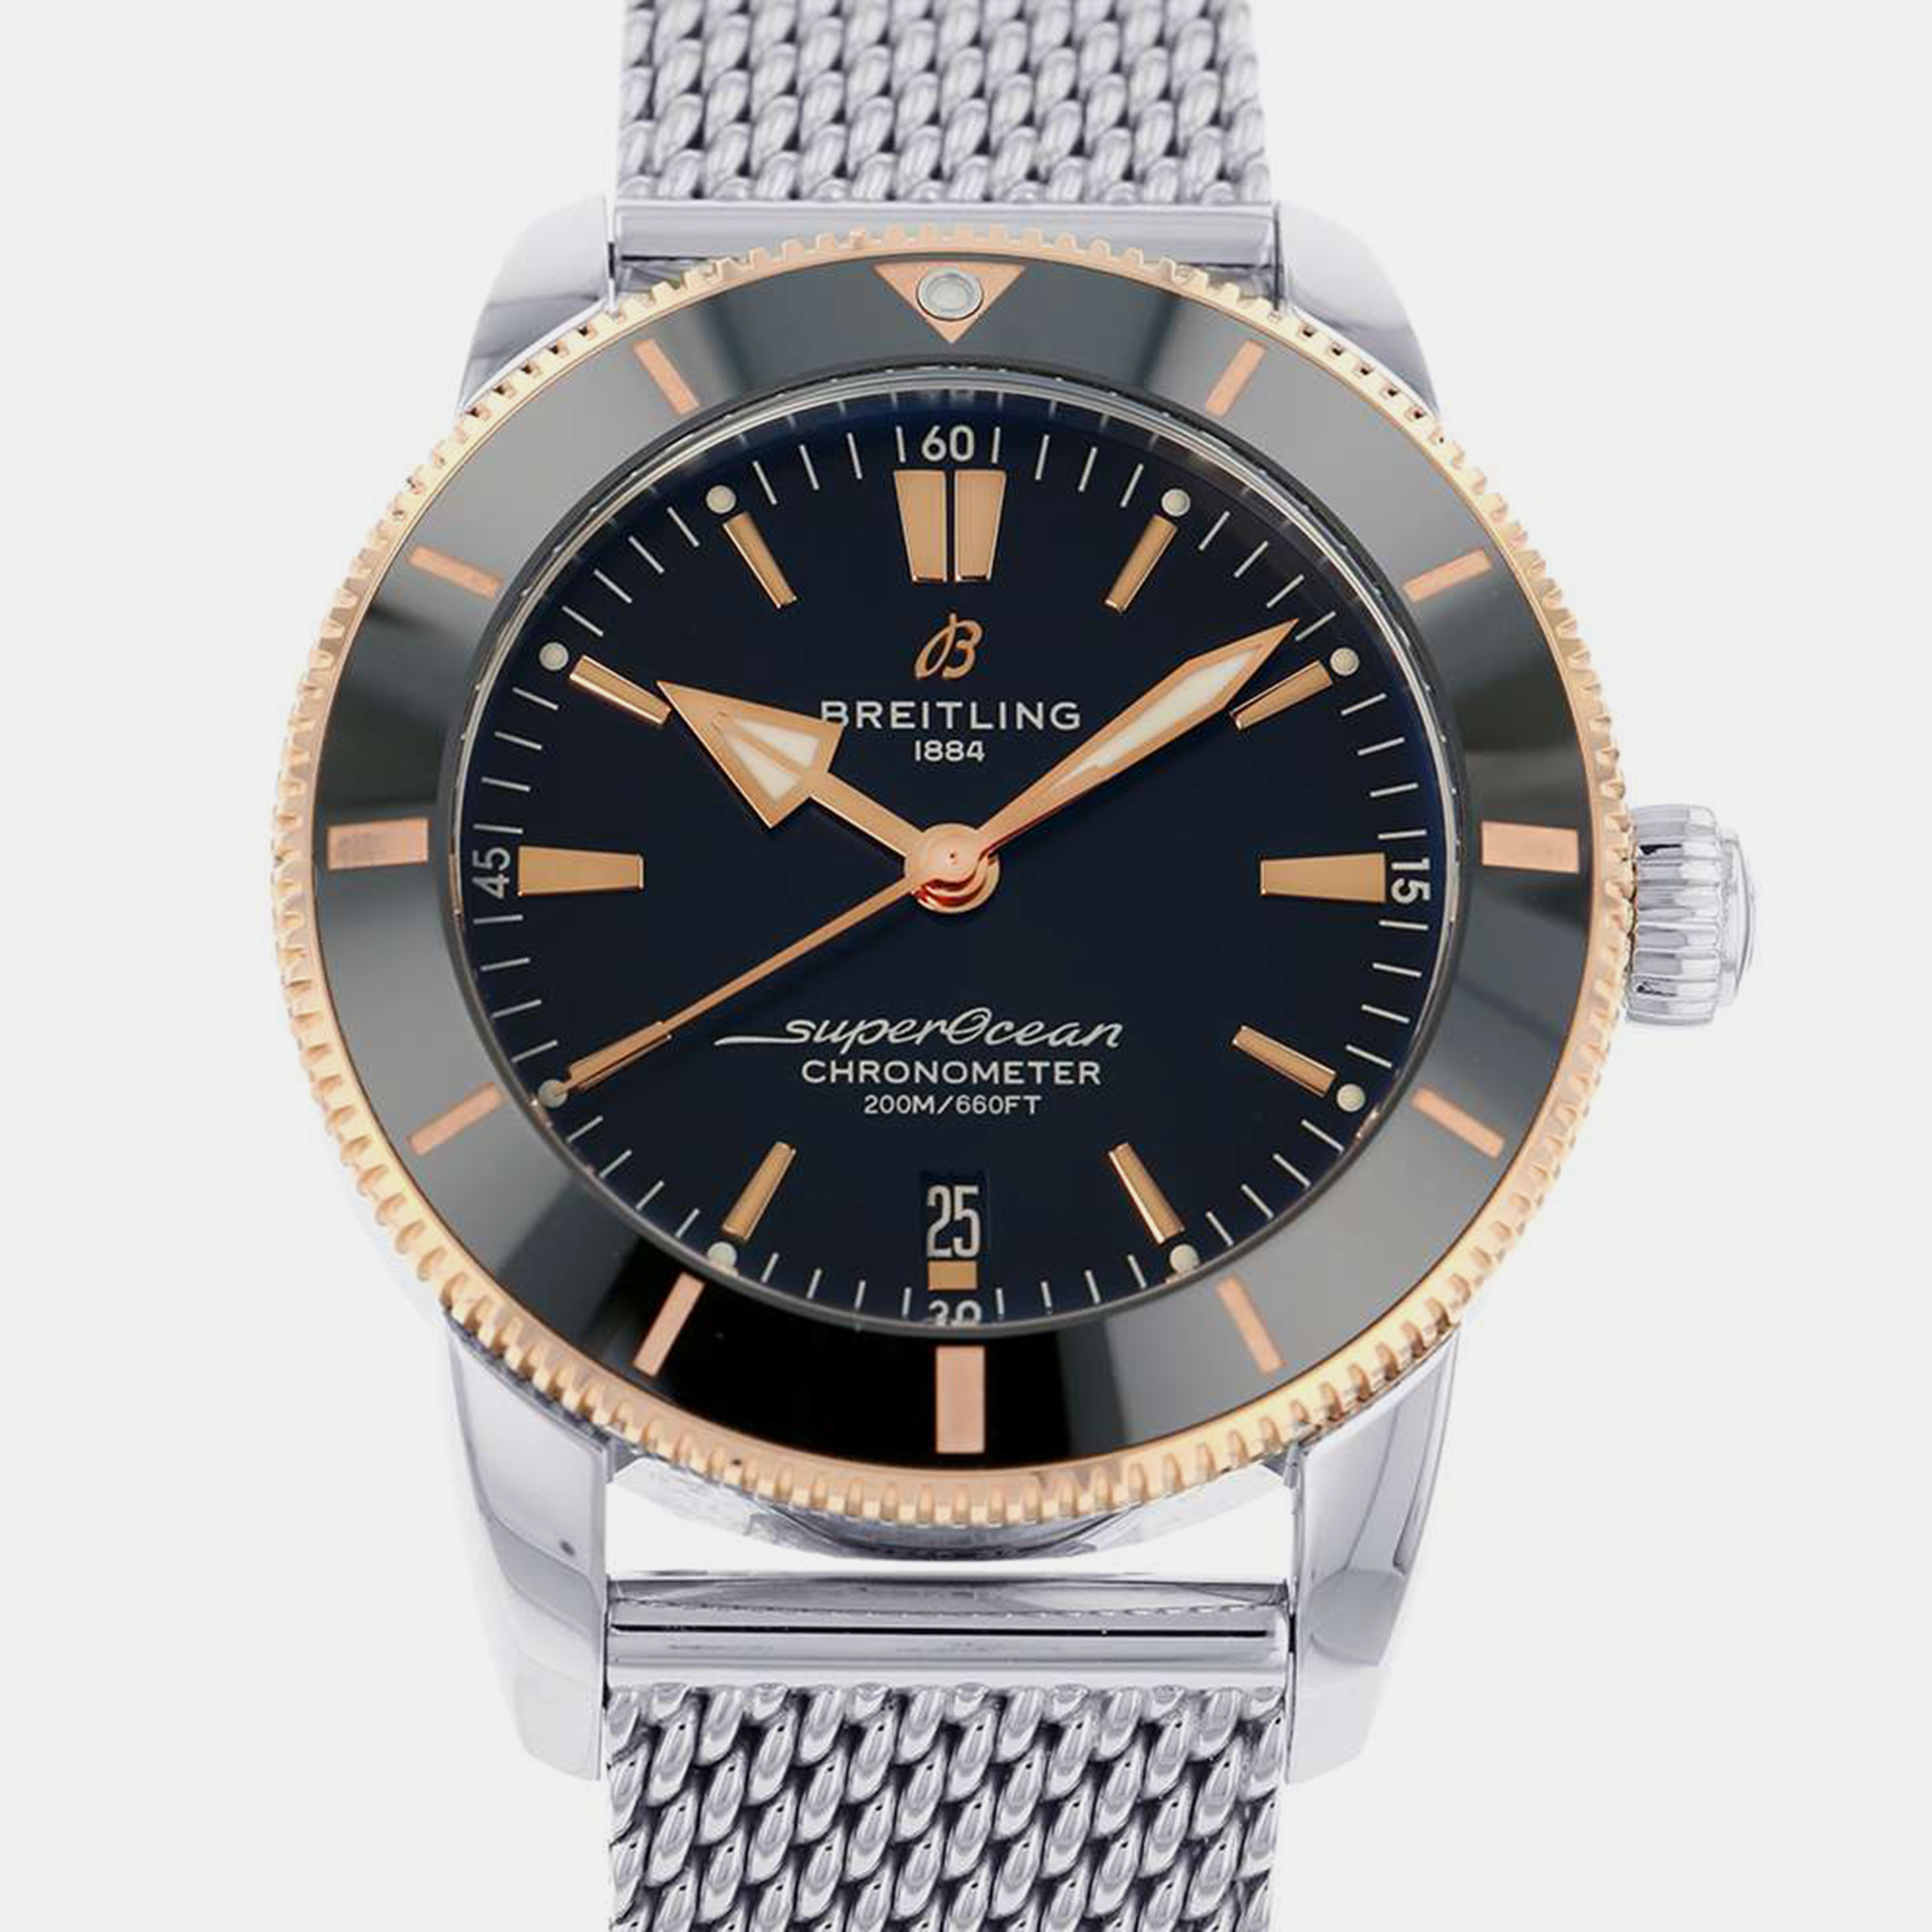 This authentic Breitling watch is characterized by skillful craftsmanship and understated charm. Meticulously constructed to tell time in an elegant way it comes in a sturdy case and flaunts a seamless blend of innovative design and flawless style.